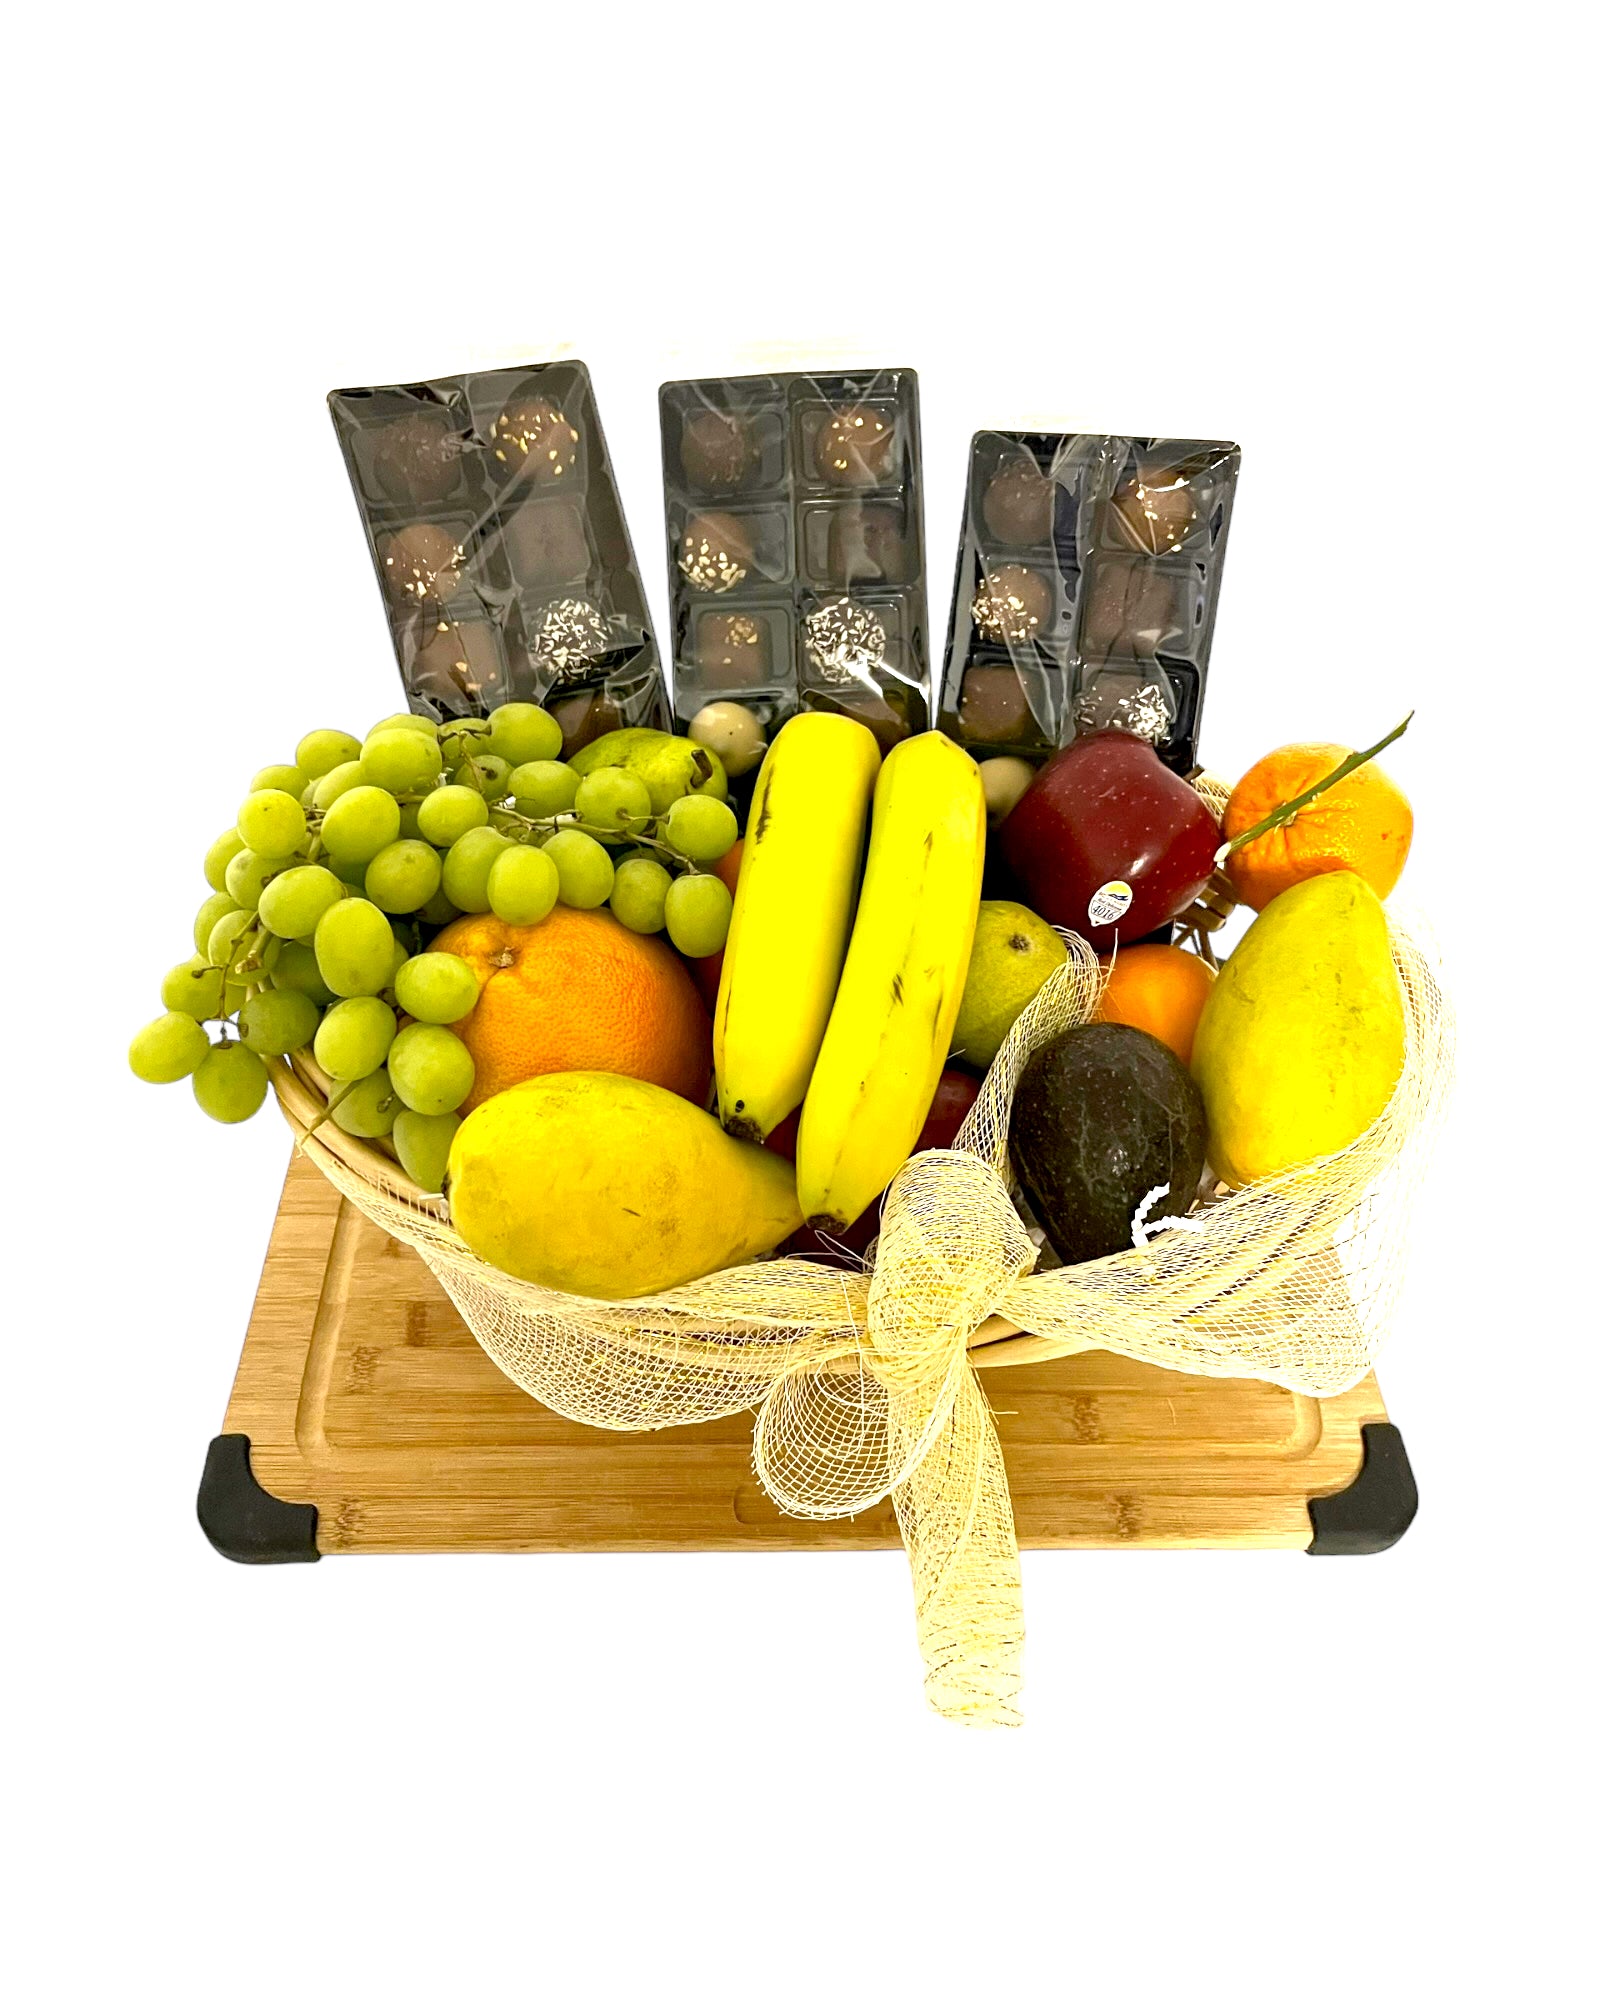 Indulge in Tempting Delights with our Irresistible Fruit A La Chocolate Basket